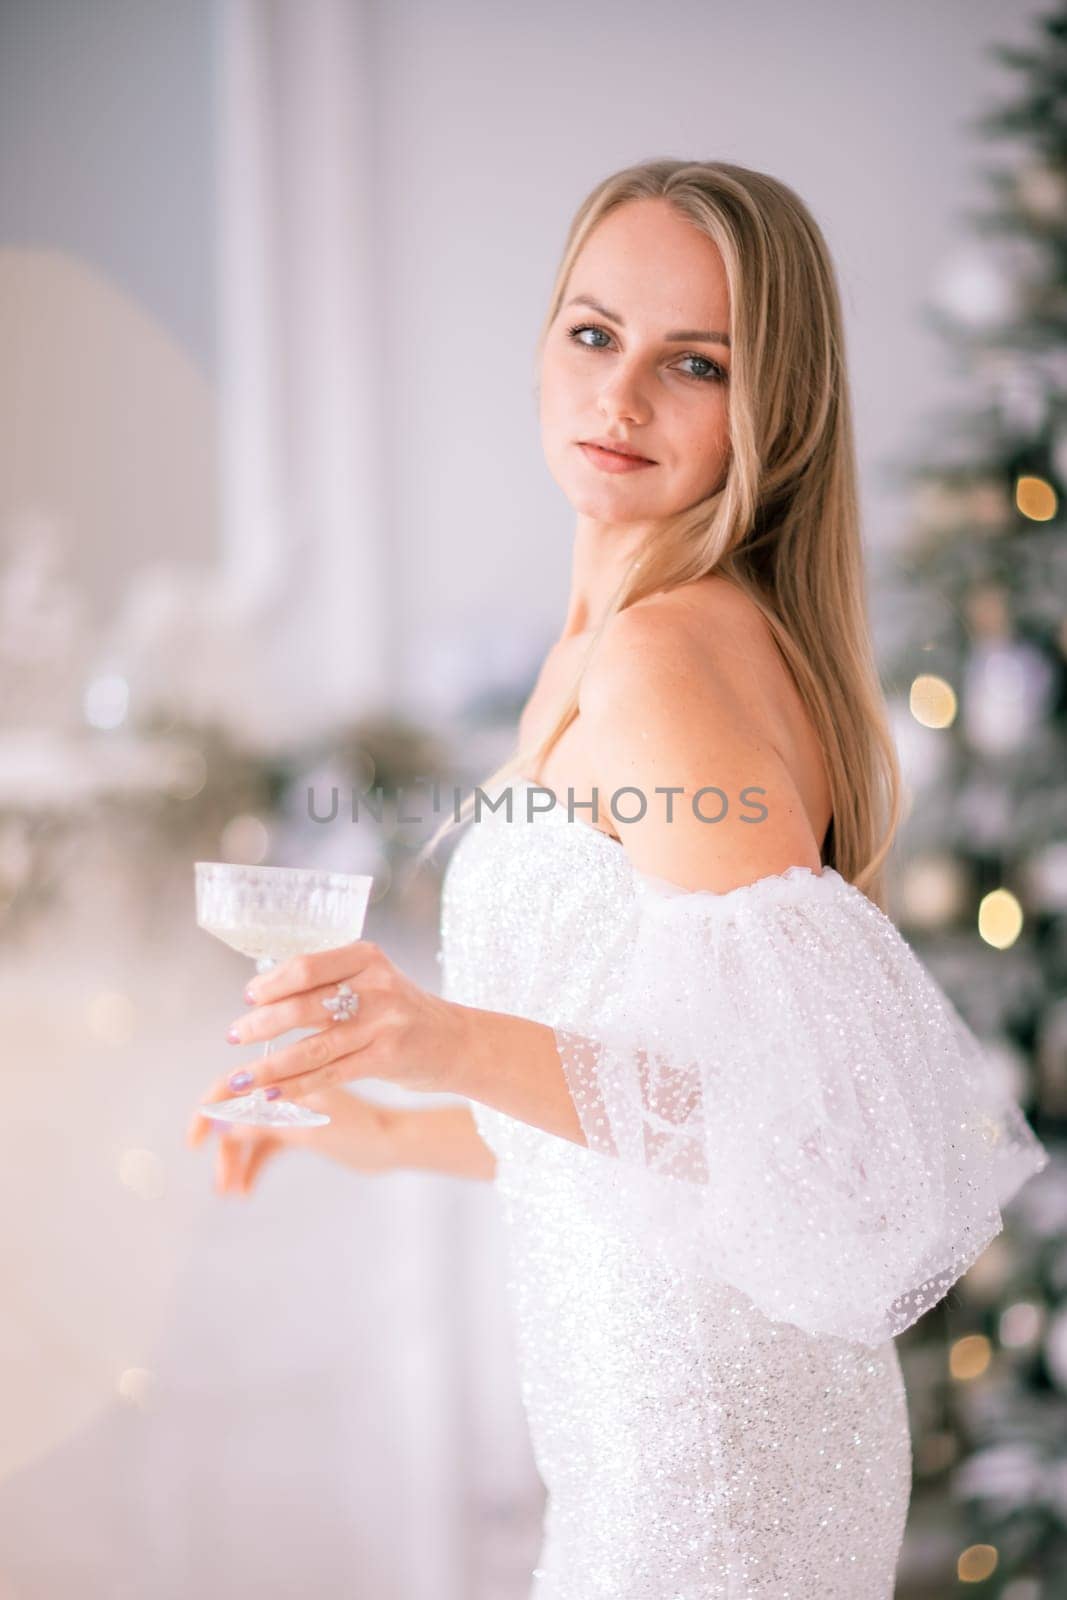 The blonde in the Christmas room. A beautiful blonde woman in a shiny light short dress with a train stands in a beautiful bright room decorated with a festive interior with a Christmas tree